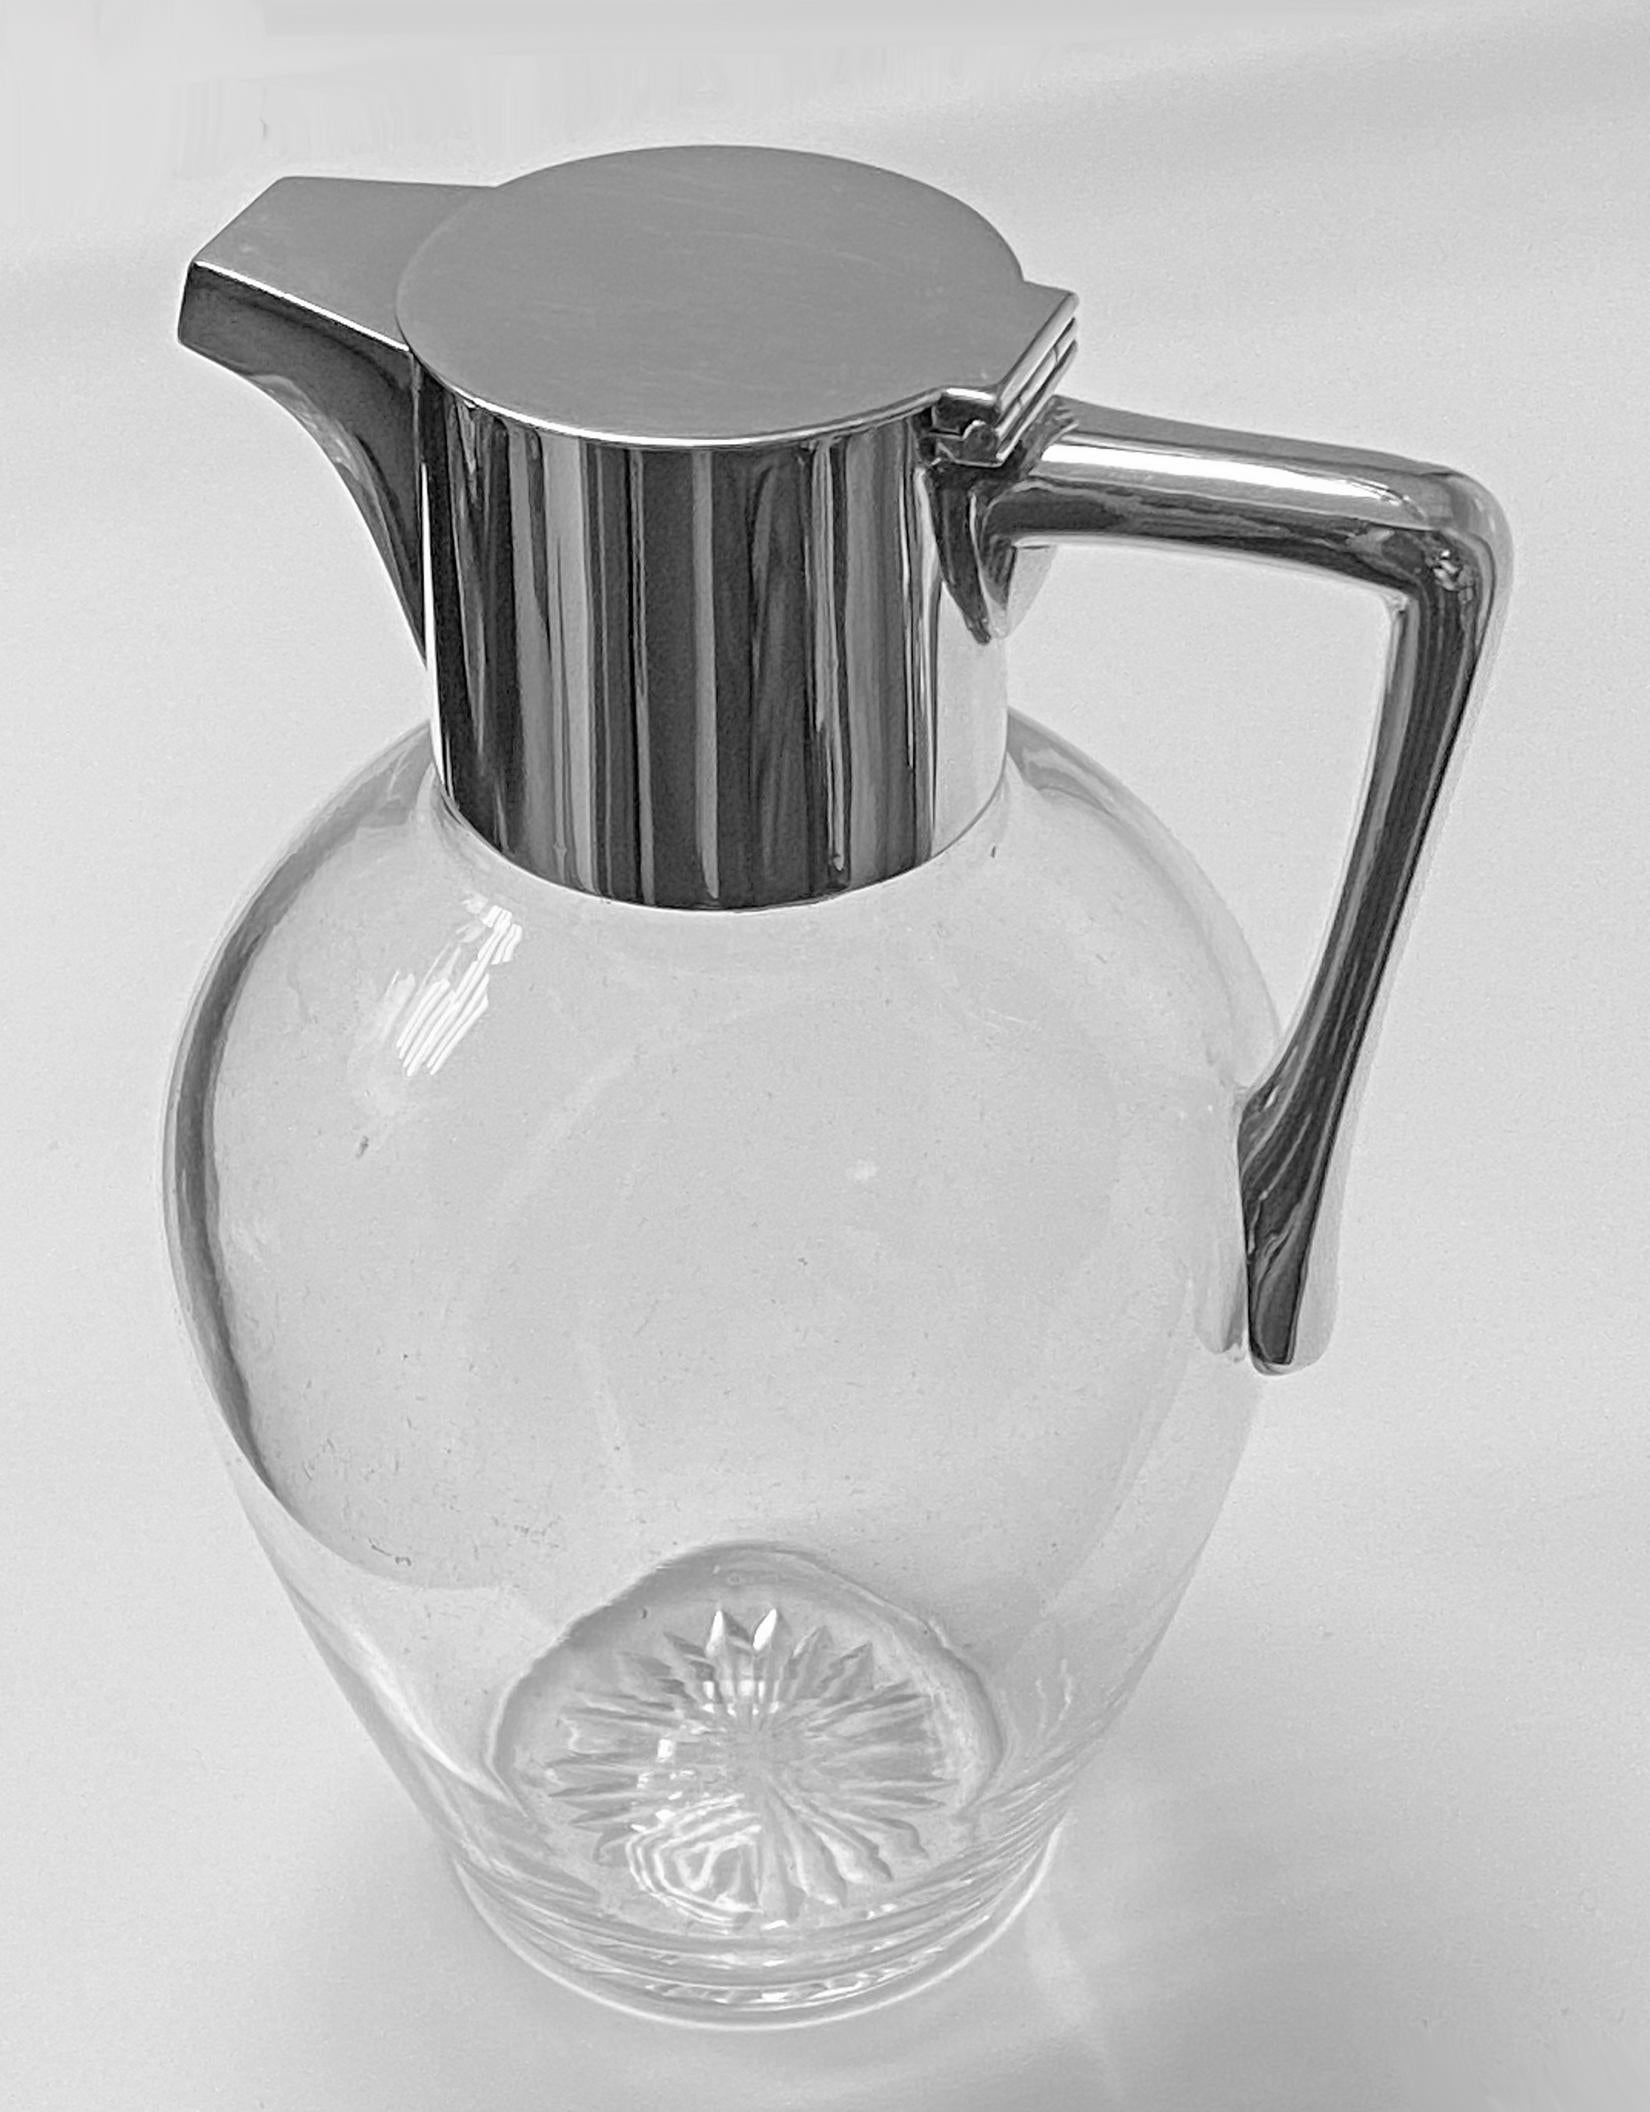 A Christopher dresser (1834-1904) attributed glass & sterling silver claret Jug, London 1897 Heath and Middleton. Plain form, star cut base. Height 19 cm. Similar example see catalogue no. M-038C Ref: 'Christopher Dresser, People's Designer'